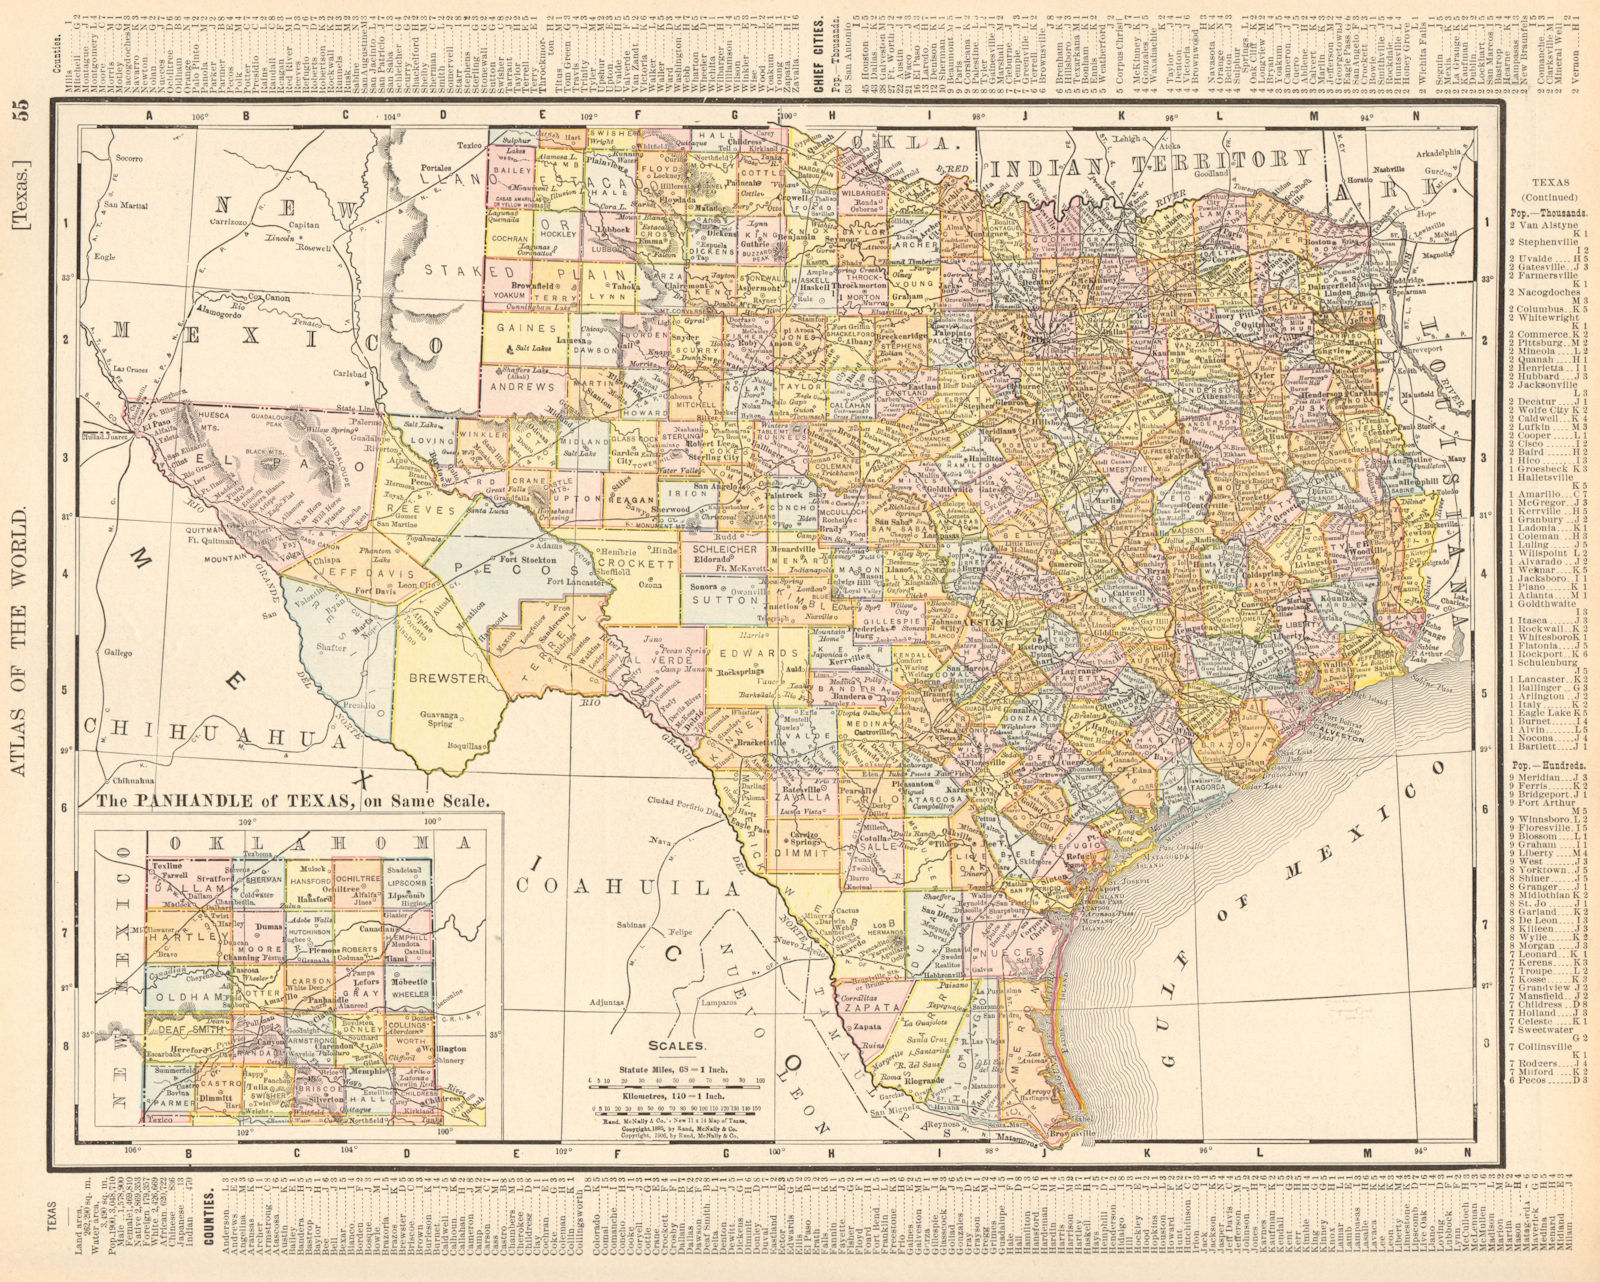 Texas state map showing counties. RAND MCNALLY 1906 old antique plan chart